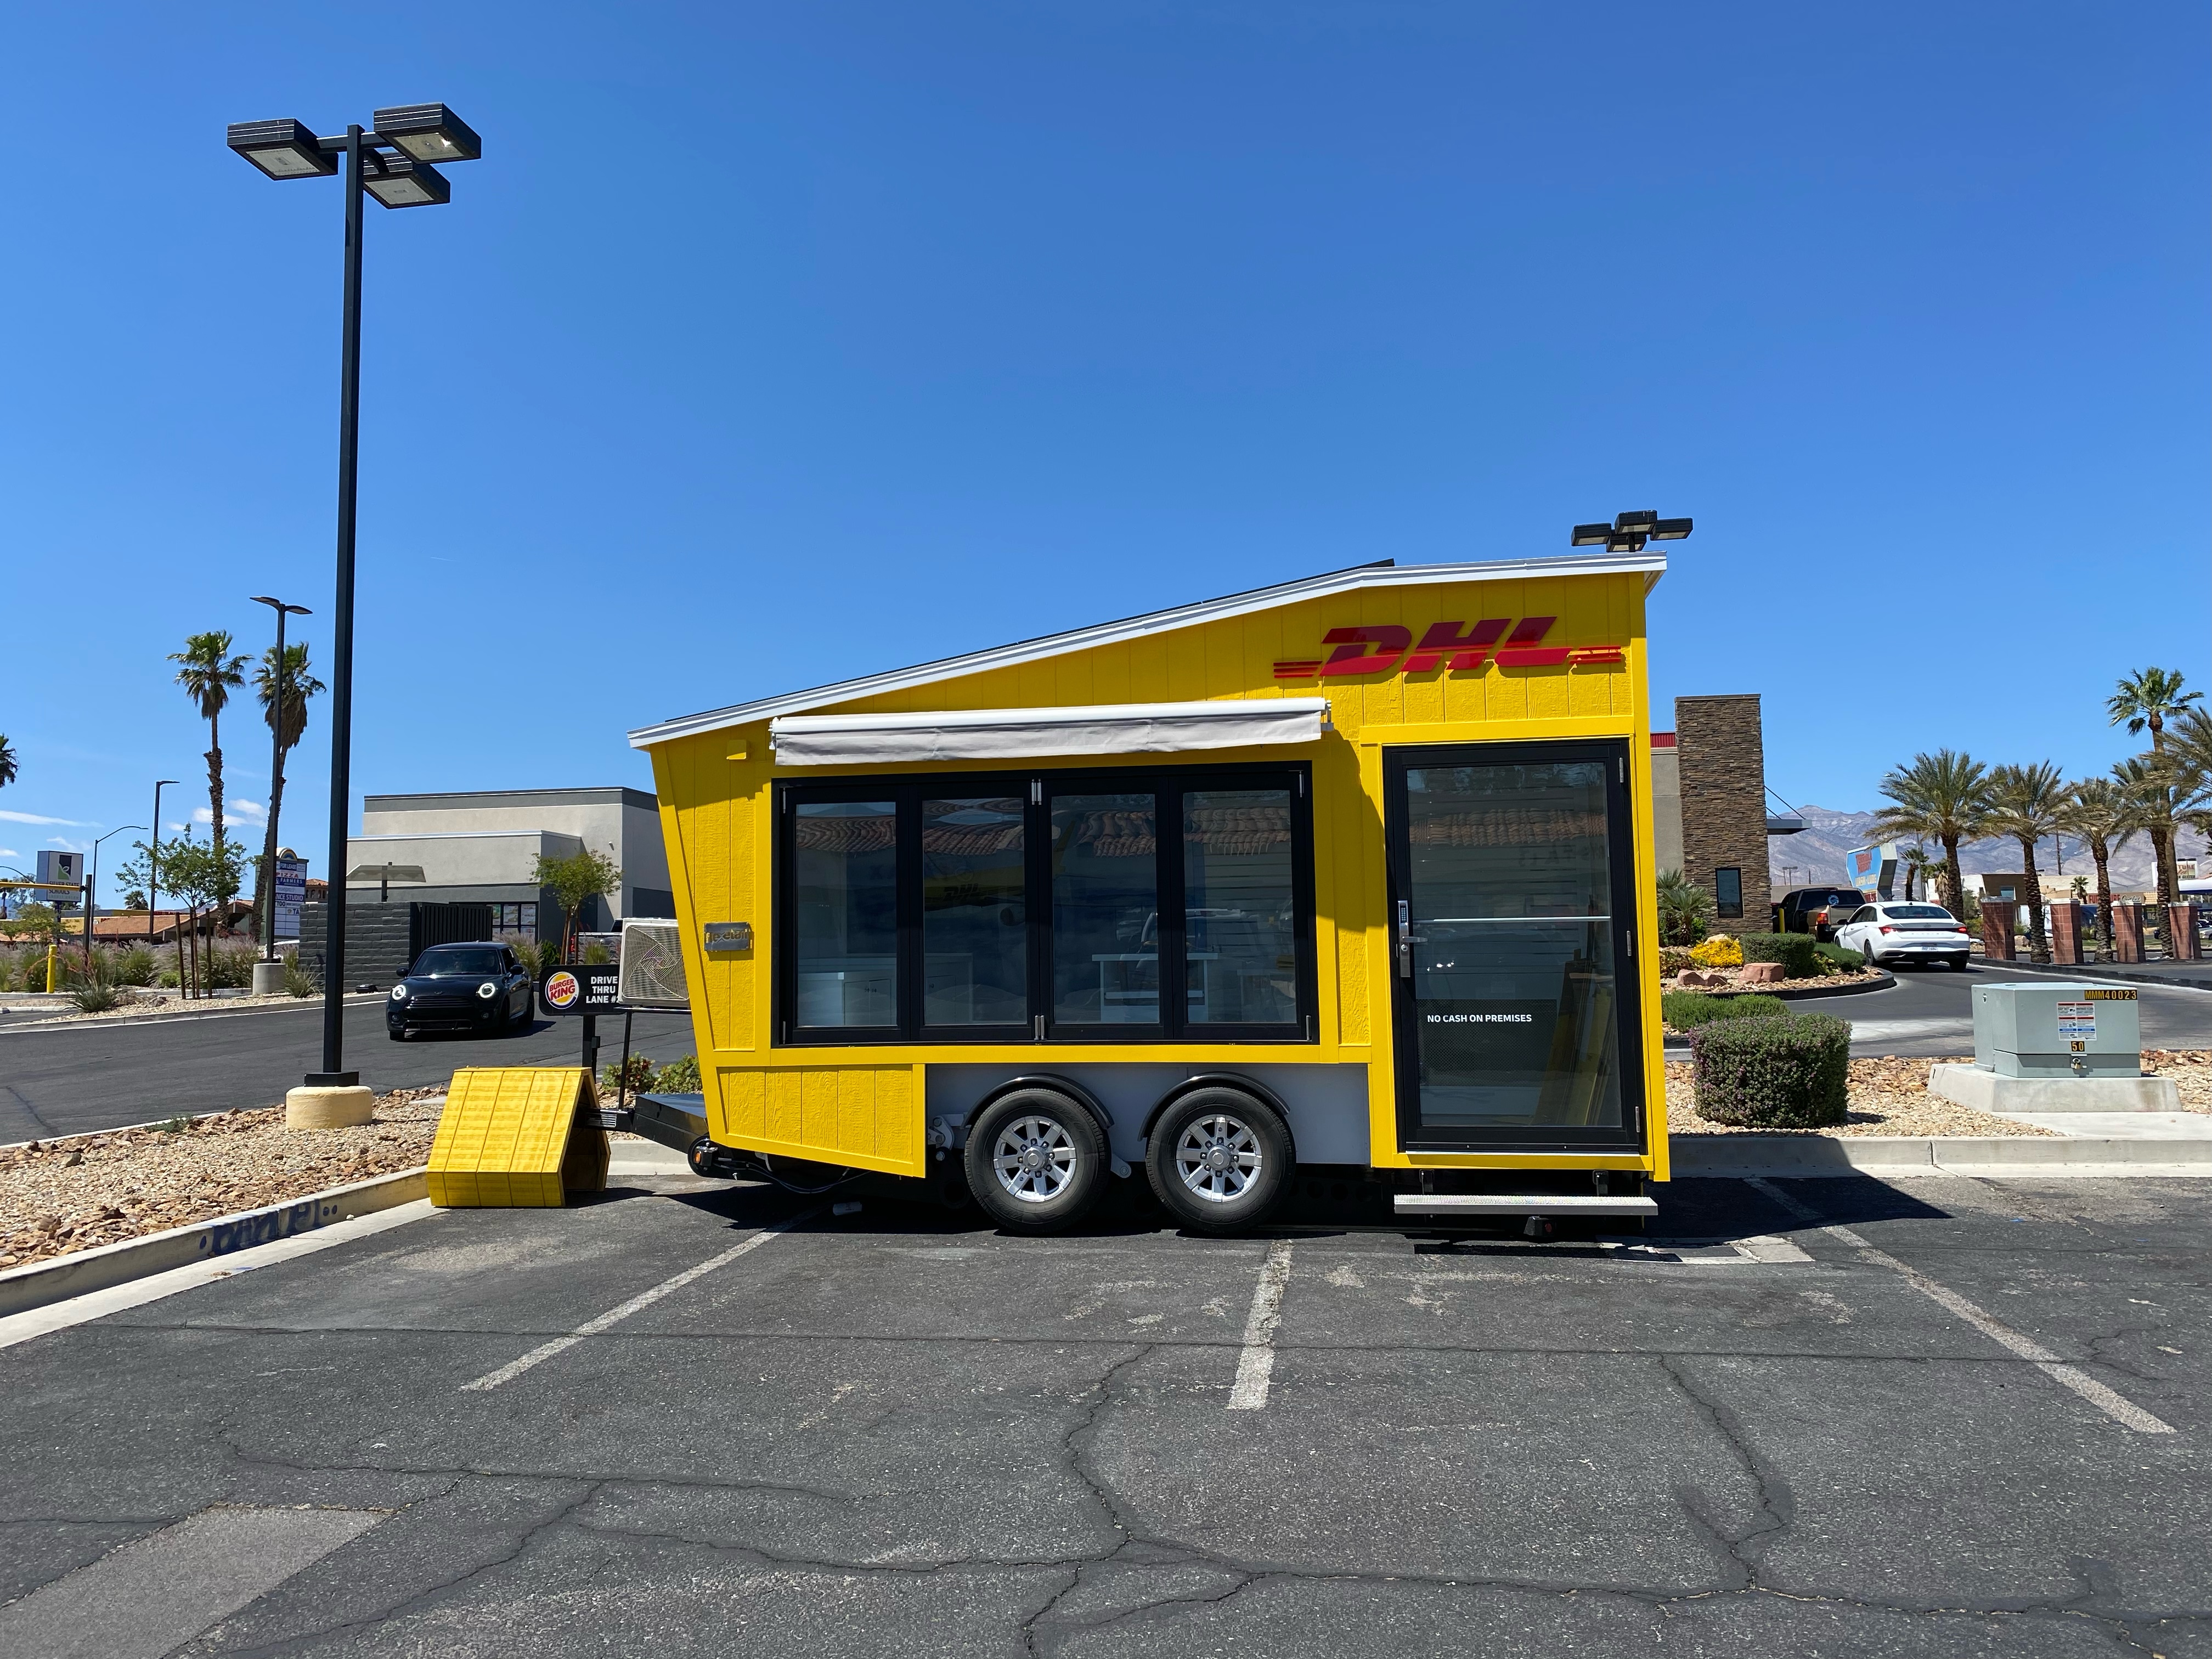 DHL Opens Mobile Pop-up Store in Fort Lauderdale - DHL - United